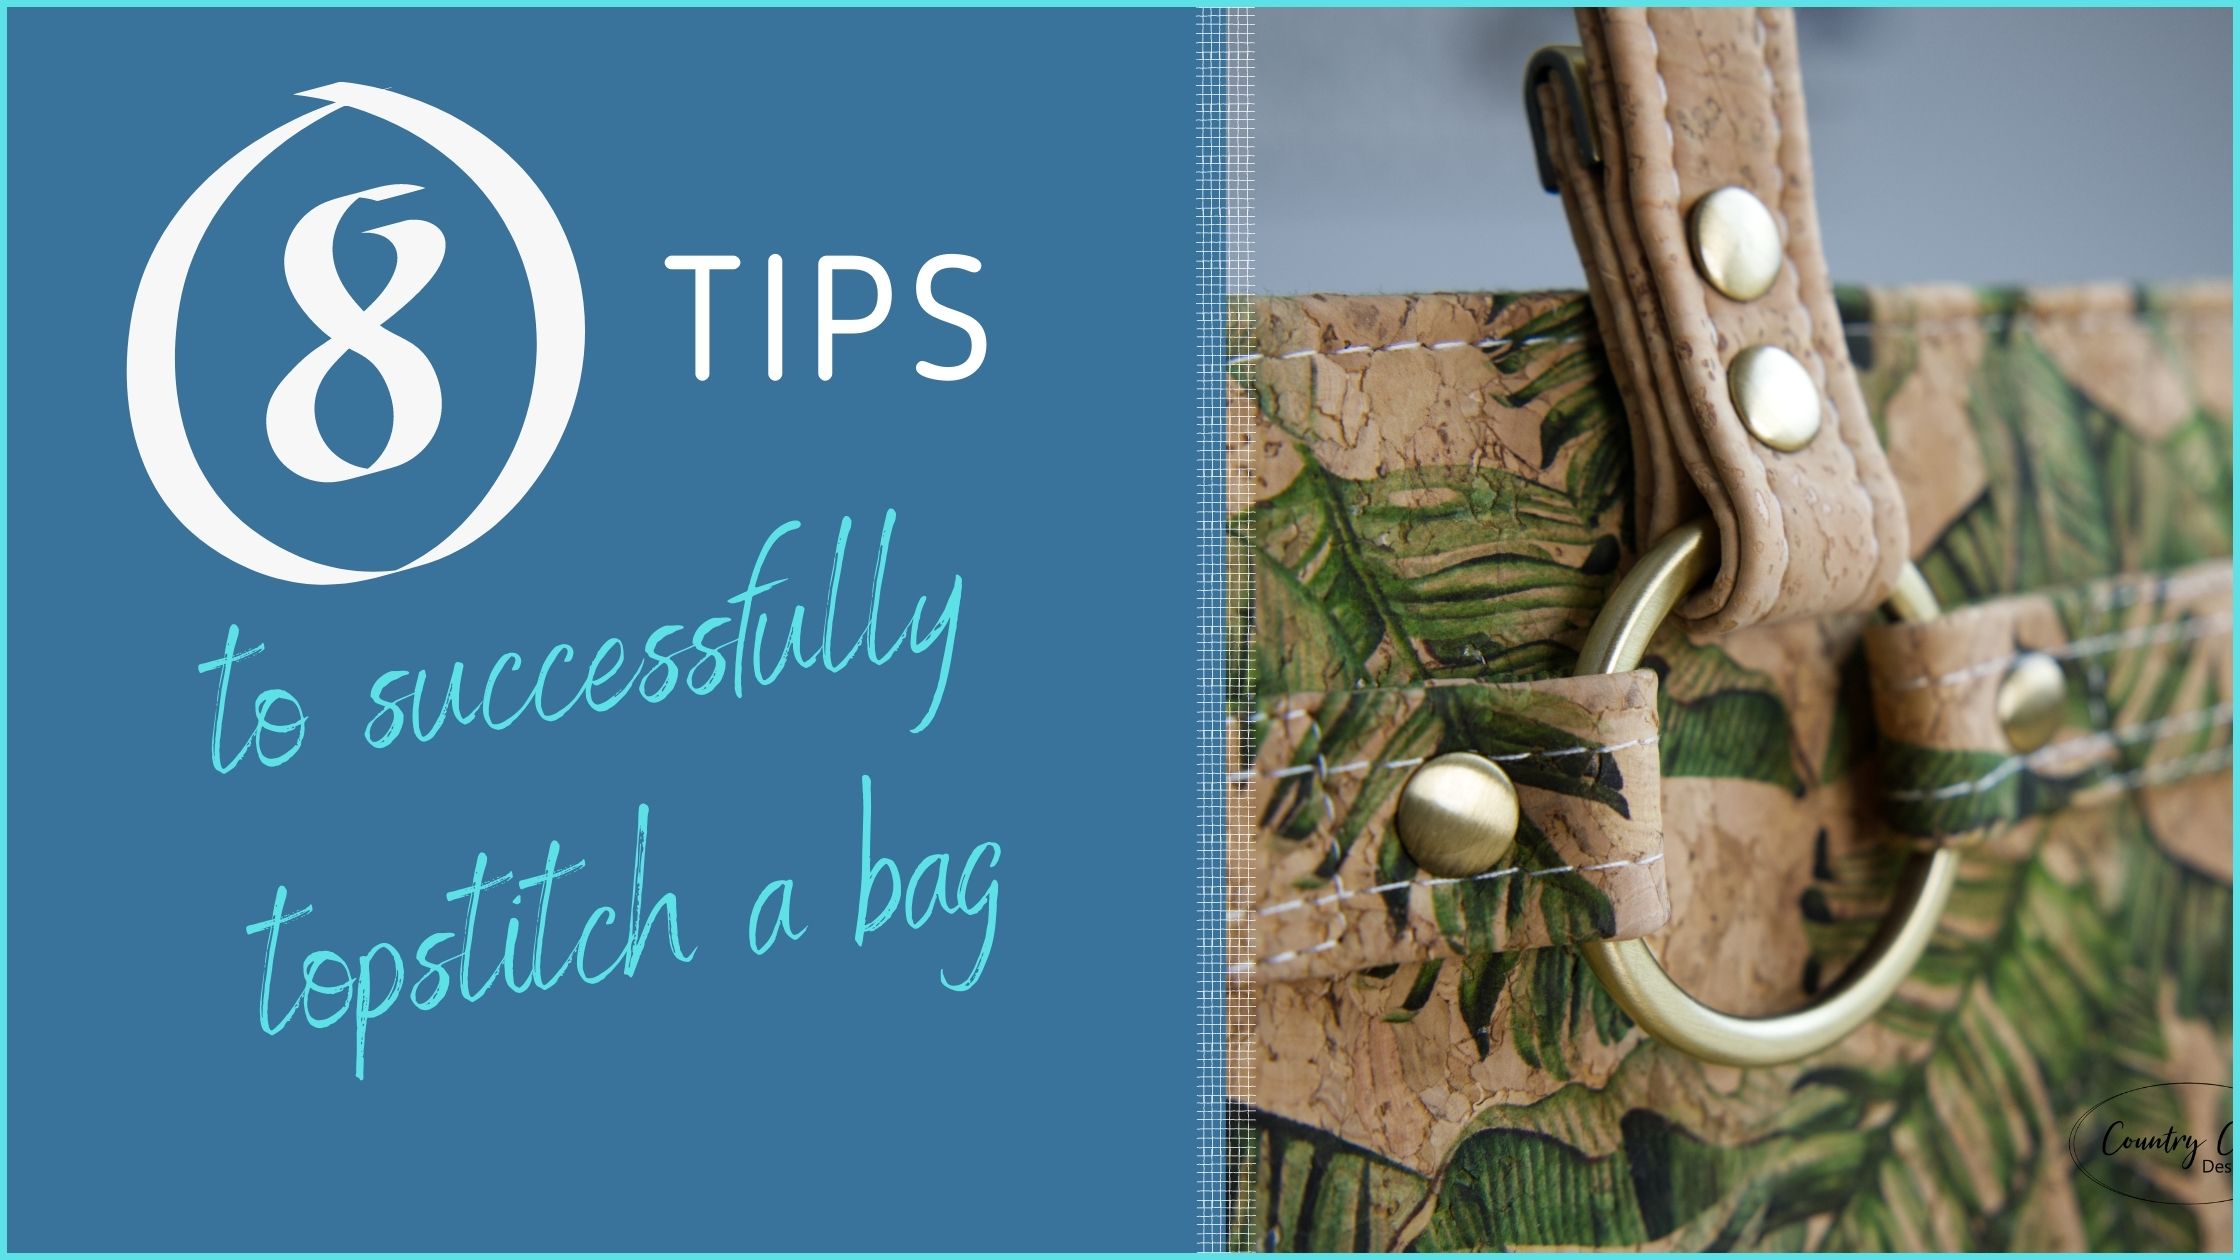 Eight Tips to Successfully Topstitch a Bag